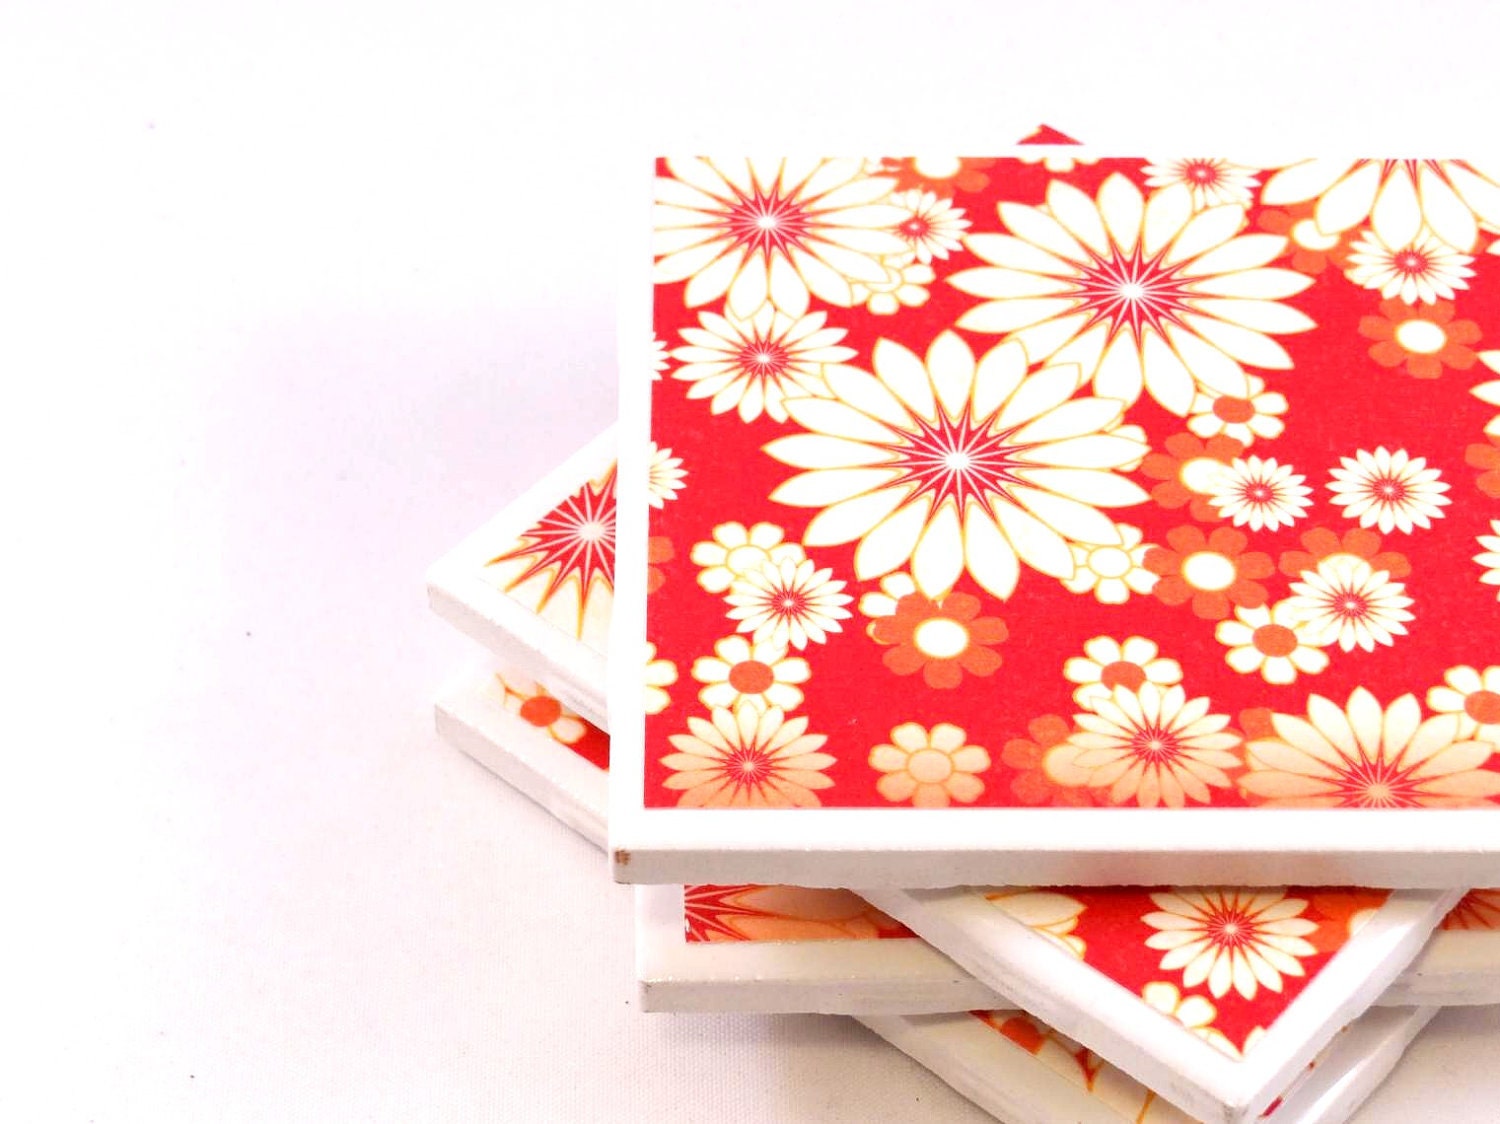 Ceramic Tile Coasters - Red, Orange and White Floral - Set of 4 - littlecoastergnome